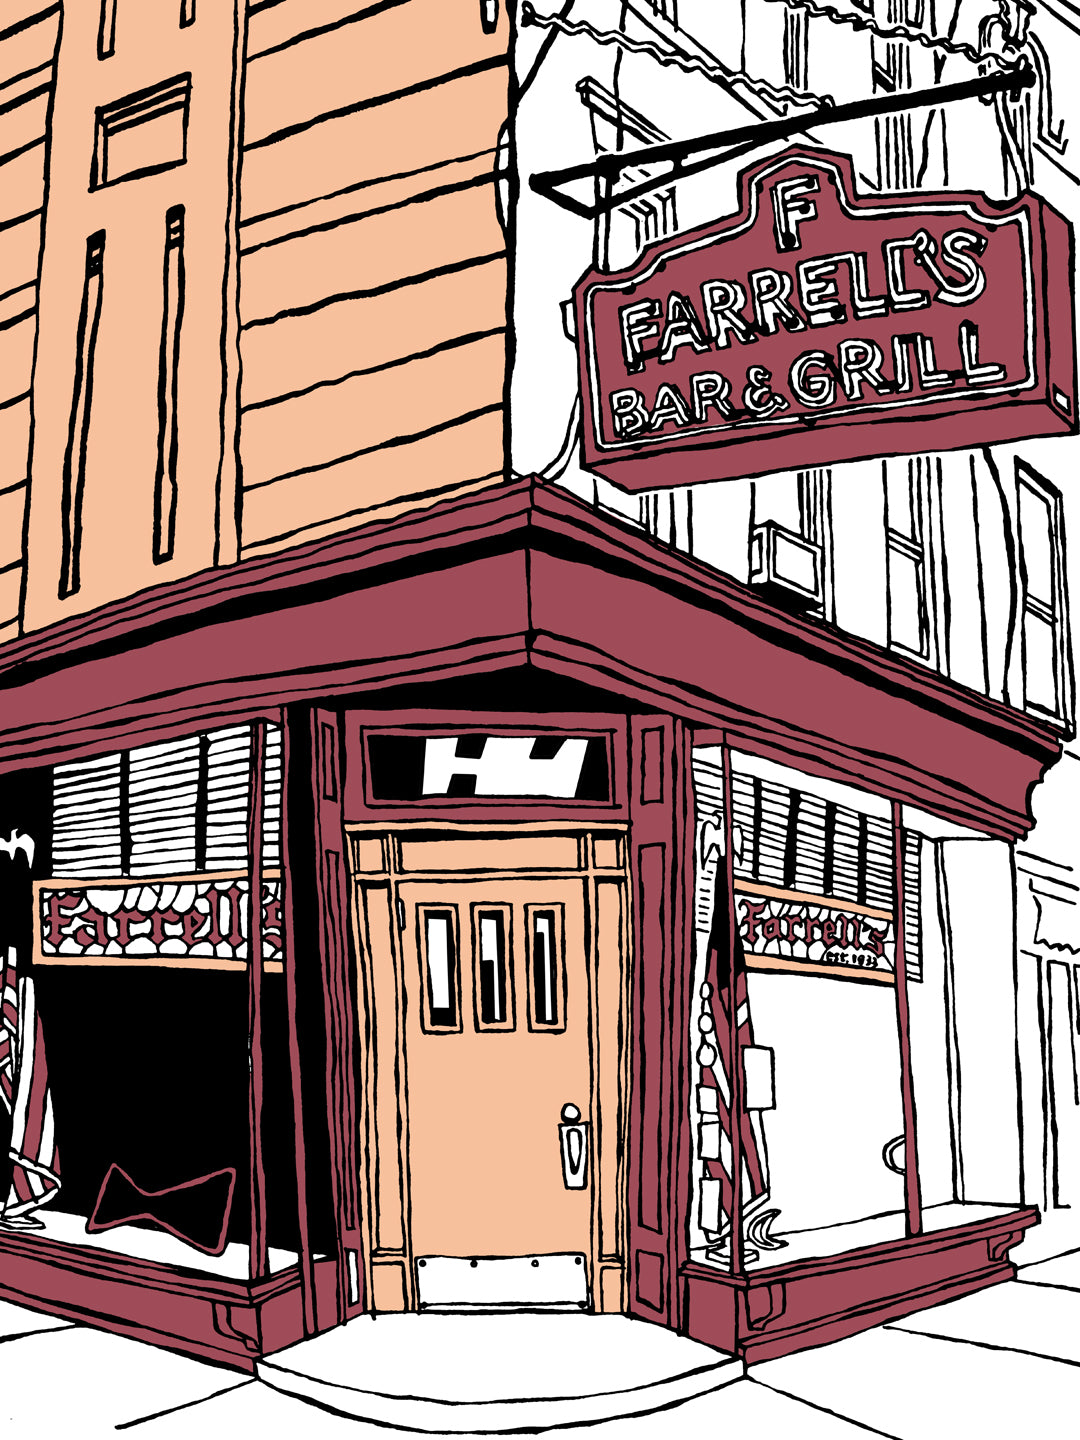 Farrell's Bar of Windsor Terrace, Brooklyn: signed prints. (ships free in the US)